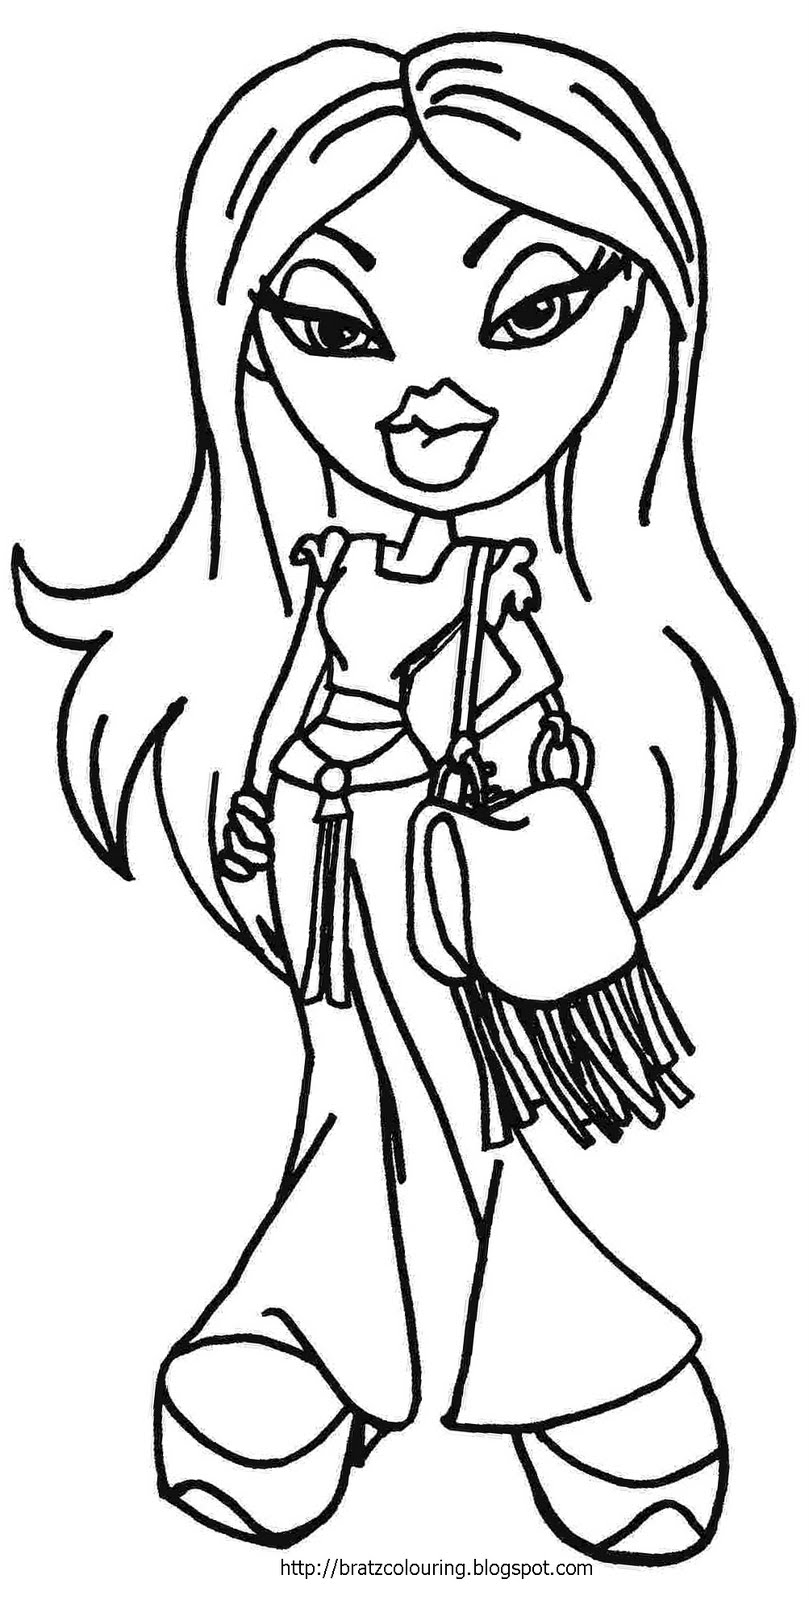 Bratz #32432 (Cartoons) – Free Printable Coloring Pages